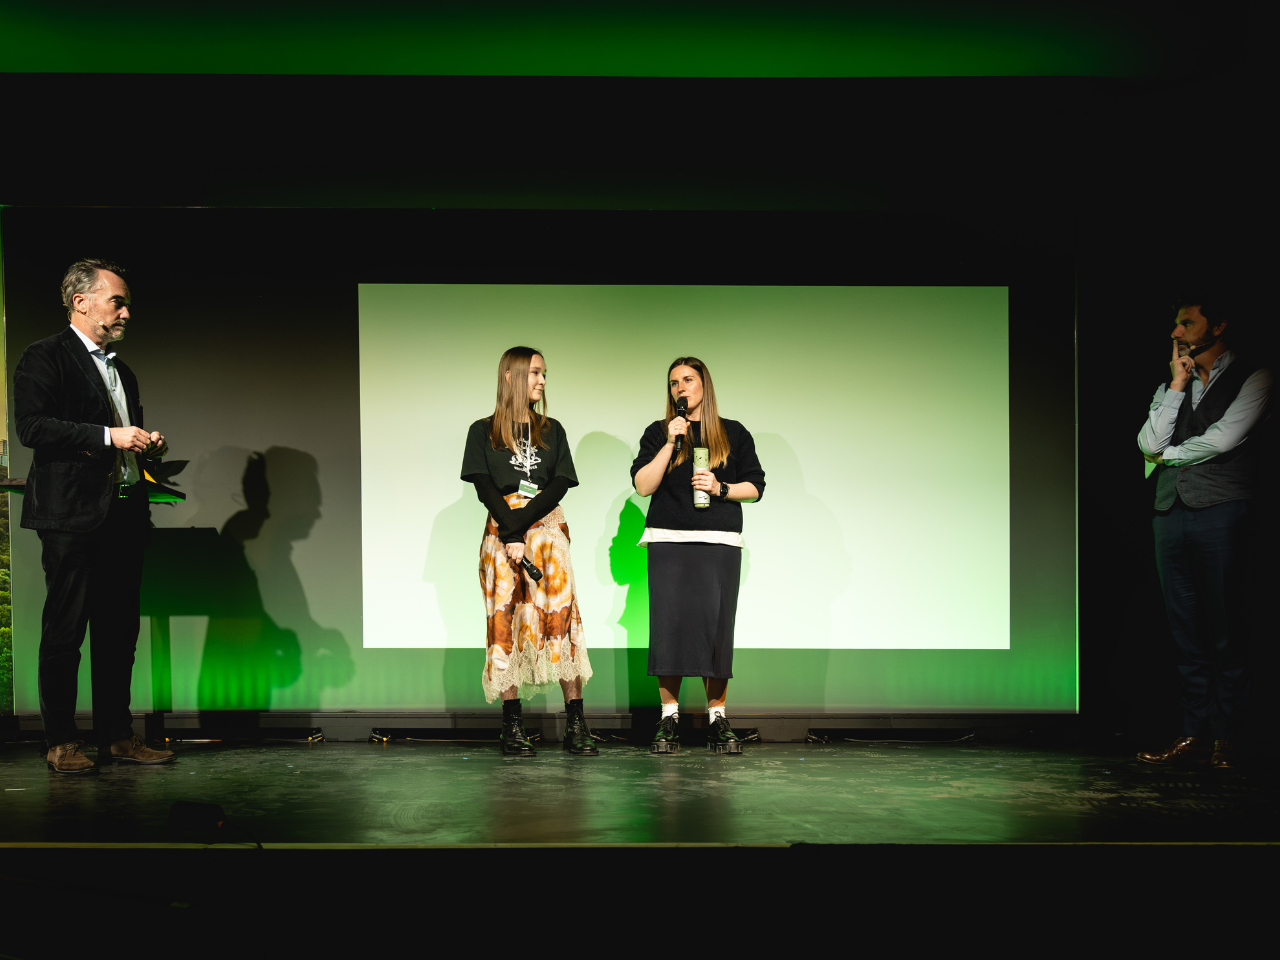 Picture show the Green Alley Award stage and the interview with Julia Bialetska, Co-Founder & CEO of S.Lab